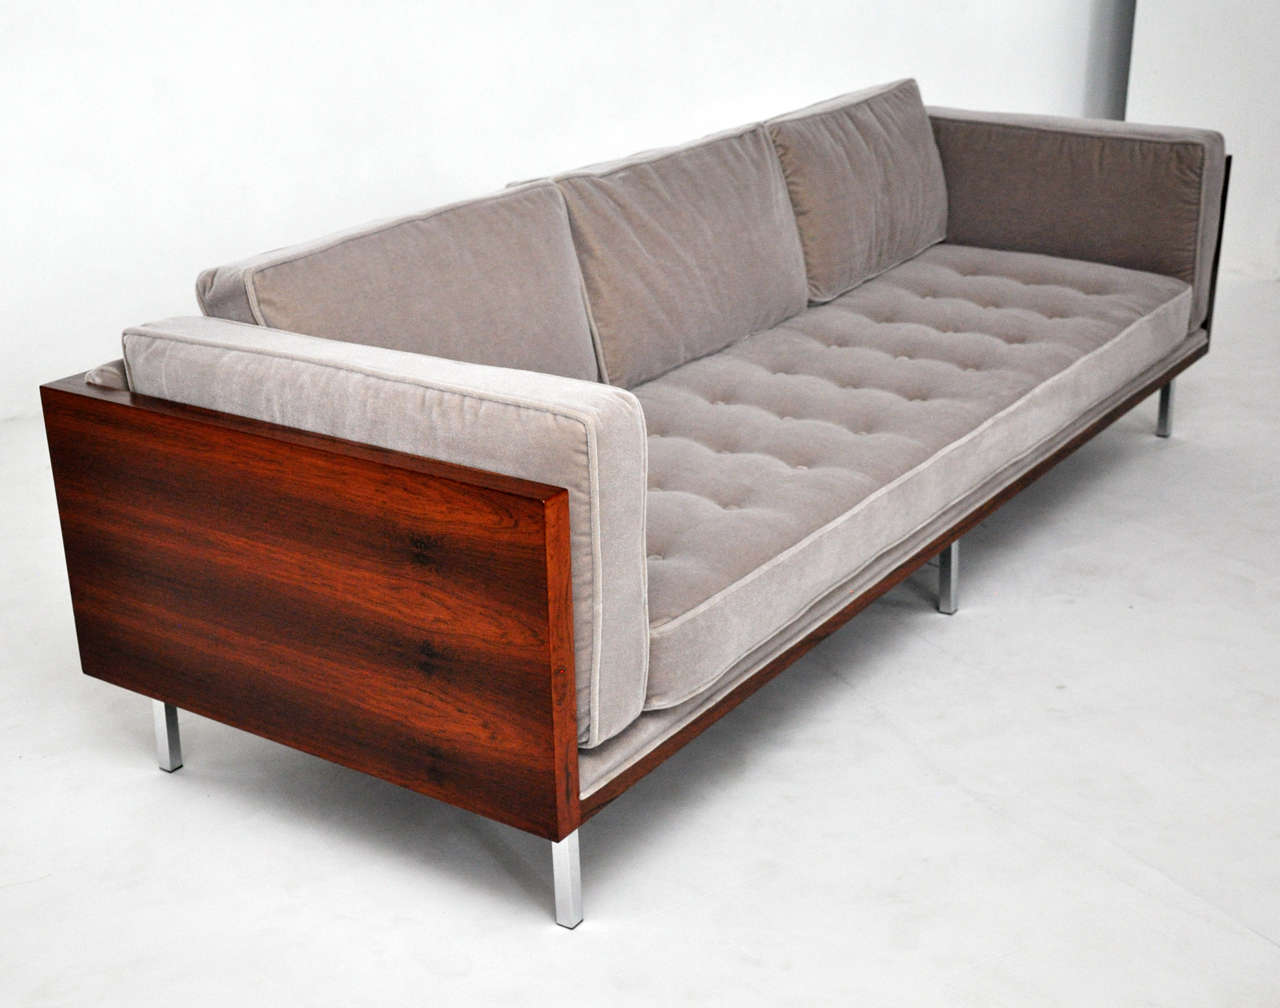 8ft rosewood case sofa by Milo Baughman.  Fully restored.  Beautiful rosewood wood grain.  Newly upholstered in smoke grey Belgian mohair.